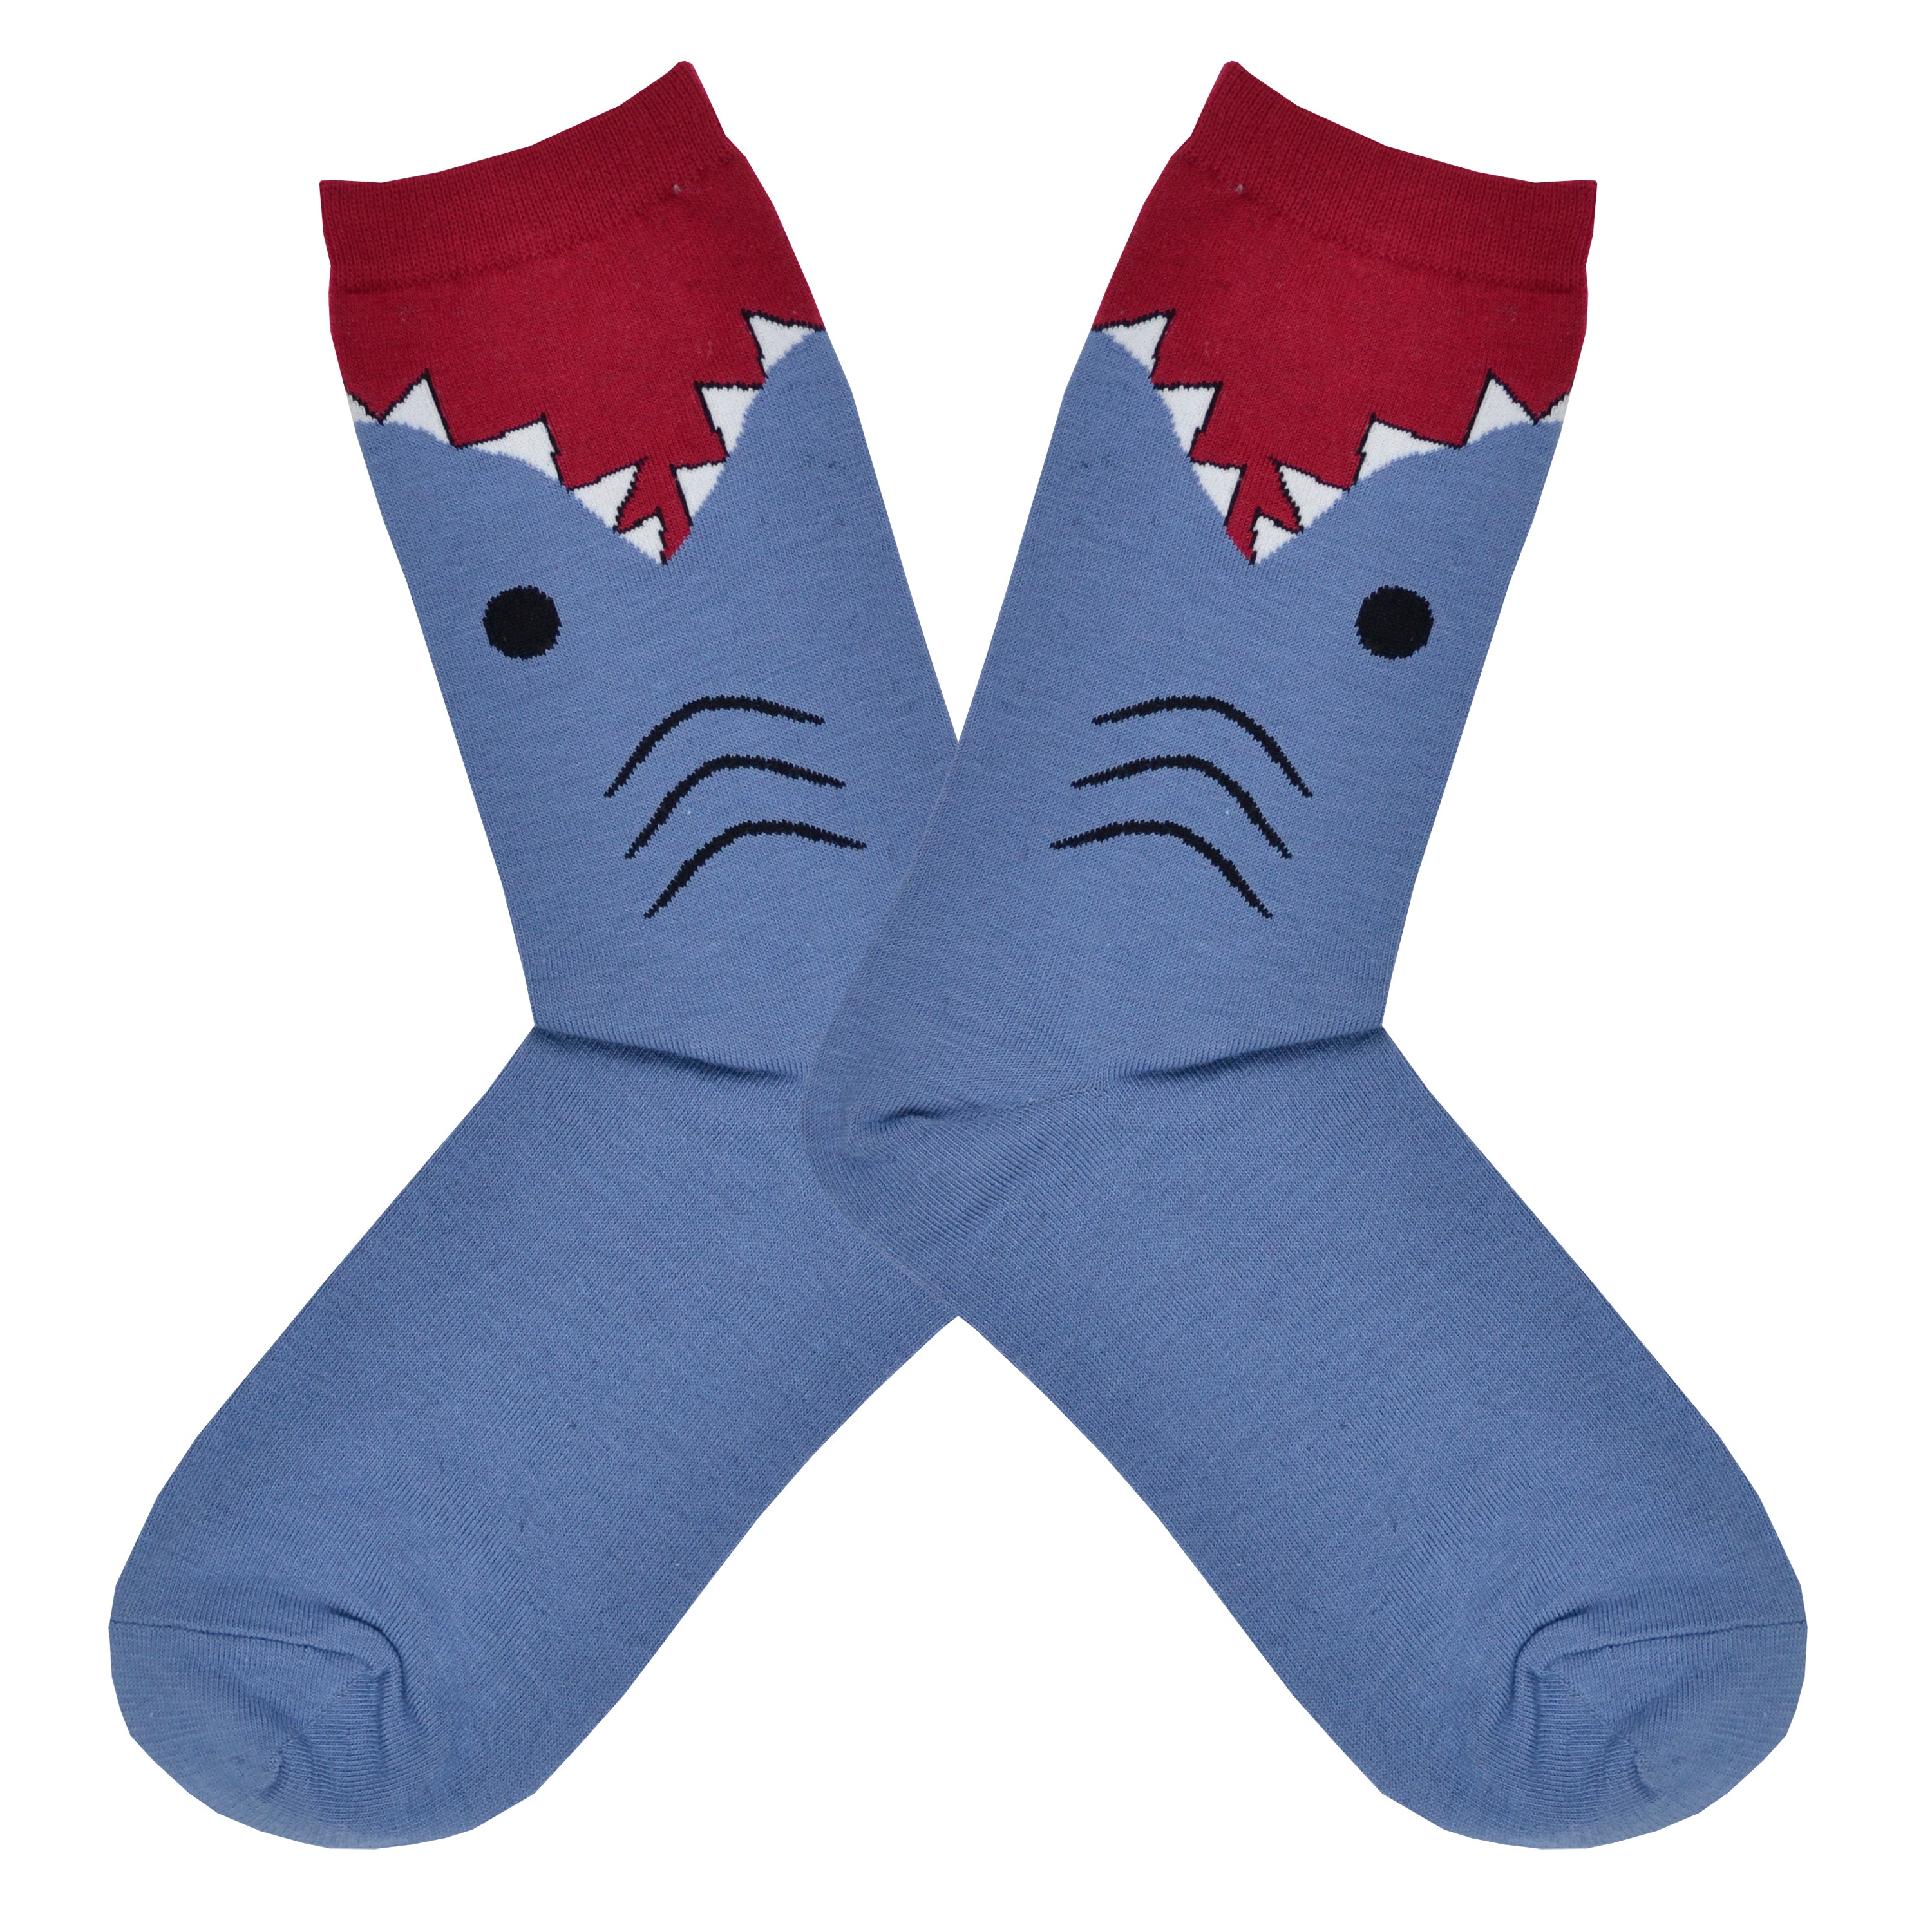 These blue cotton women's novelty crew socks with a red top and cuff by the brand K Bell make it look like a shark is eating your leg, showing the sharks gills, eyes and teeth chomping on your calf.